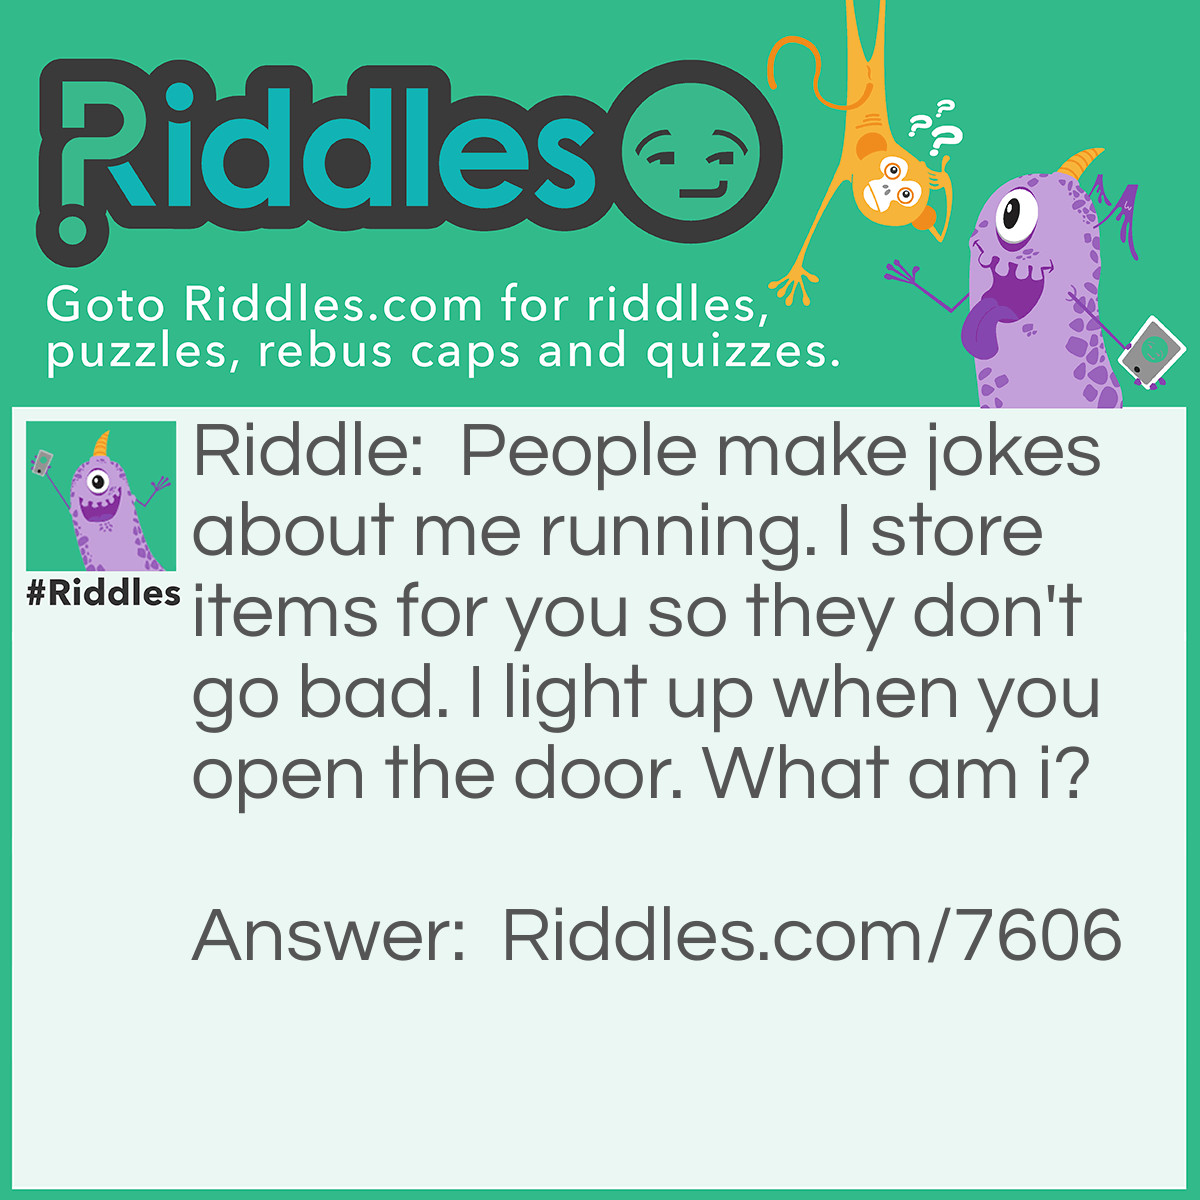 Riddle: People make jokes about me running. I store items for you so they don't go bad. I light up when you open the door. What am i? Answer: A fridge.